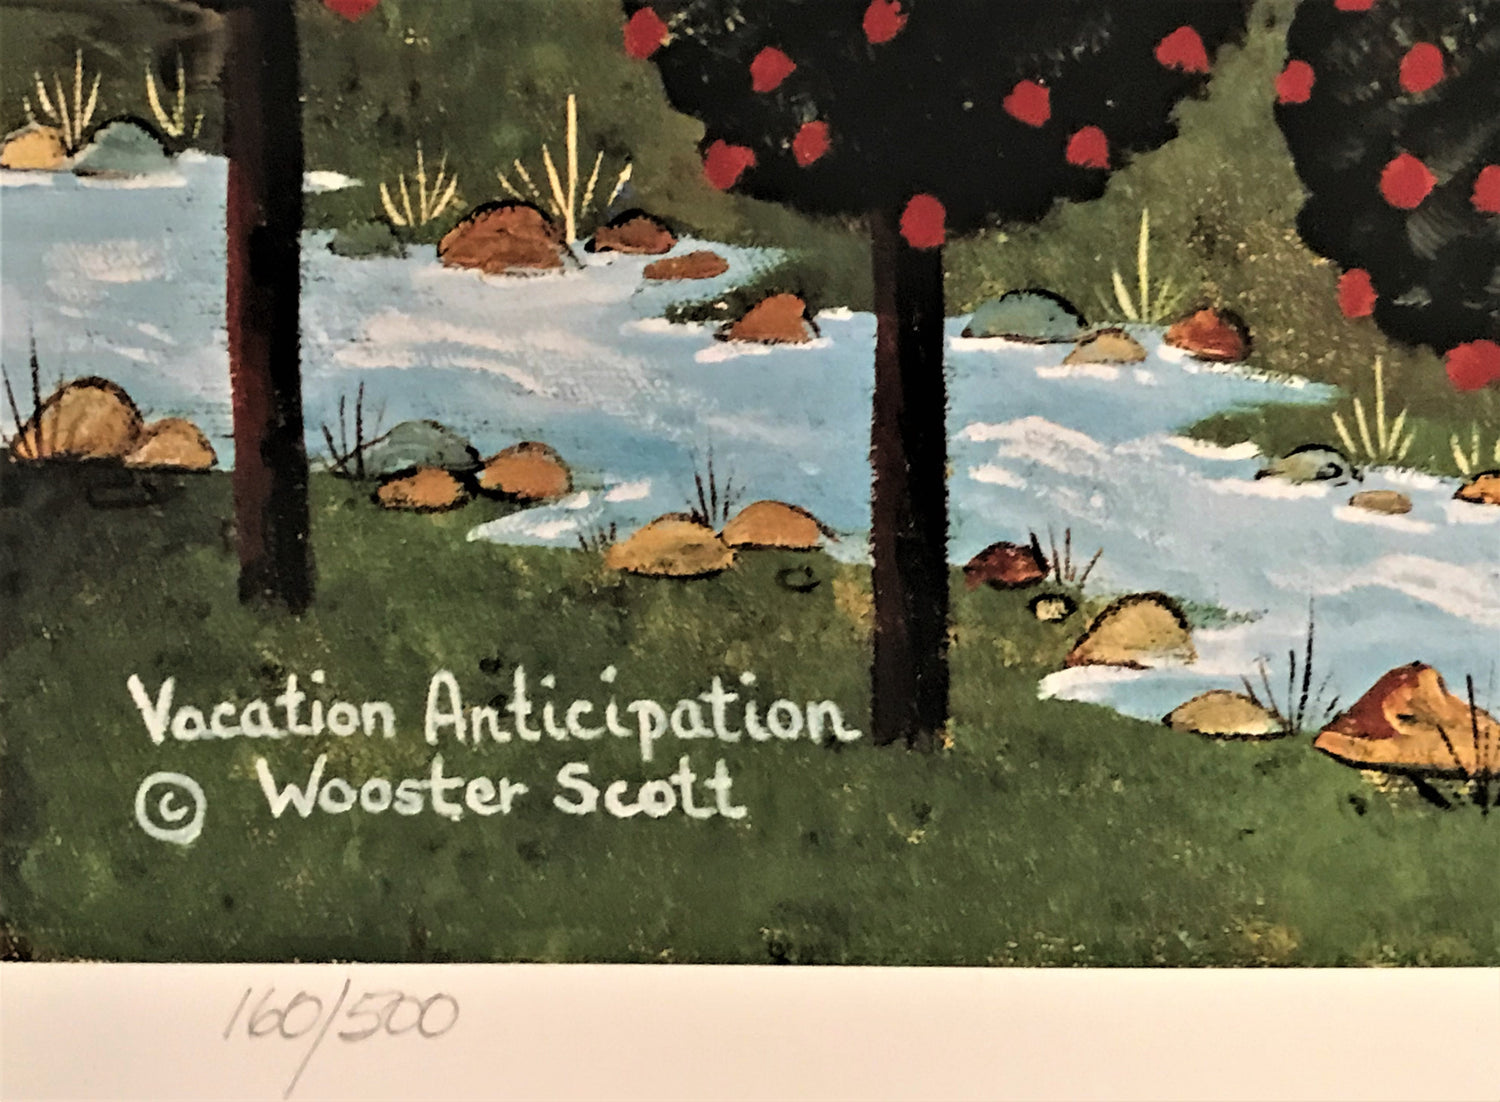 Vacation Anticipation Jane Wooster Scott Lithograph Print Artist Hand Signed and Numbered